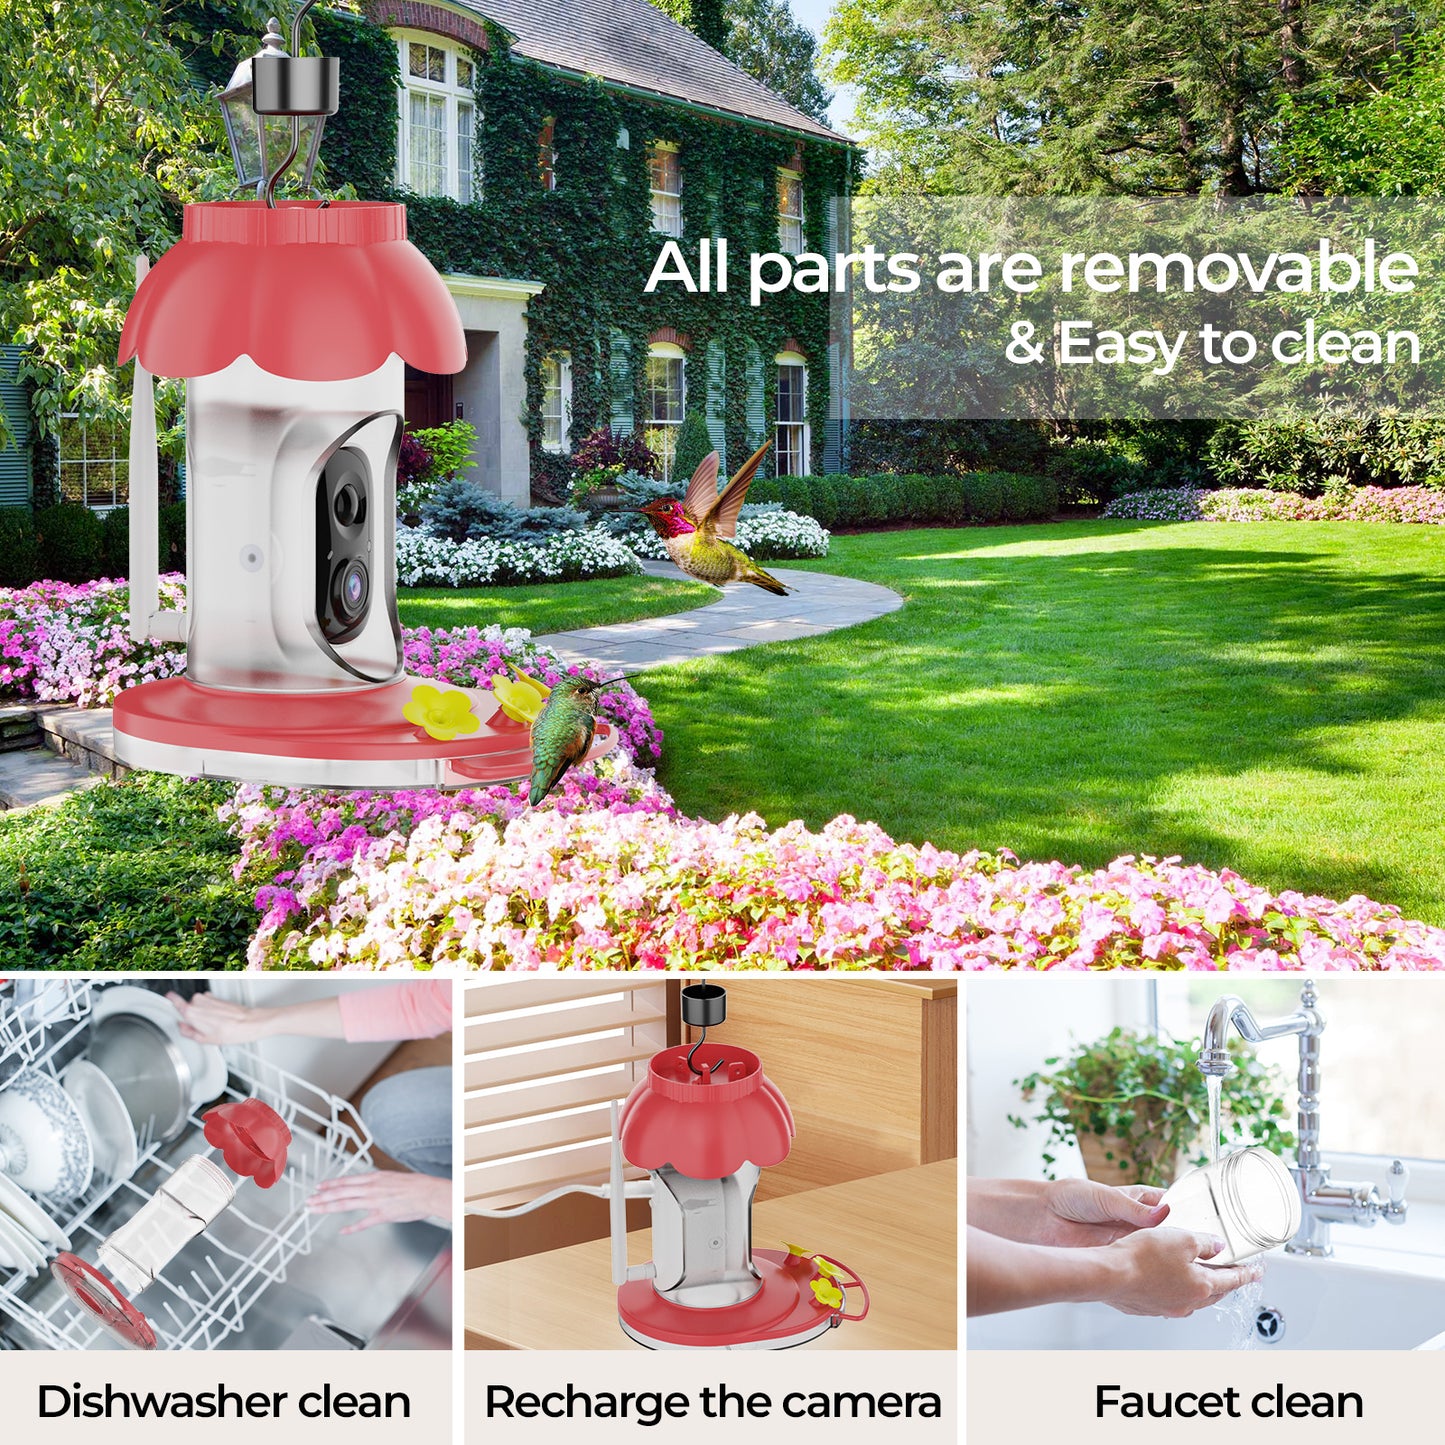 Smart Hummingbird Feeder with Camera Wireless Outdoors Bird Feeders Video Watching AI Camera with Auto Capture Videos & Motion Detection Ideal Gift for Bird Lovers